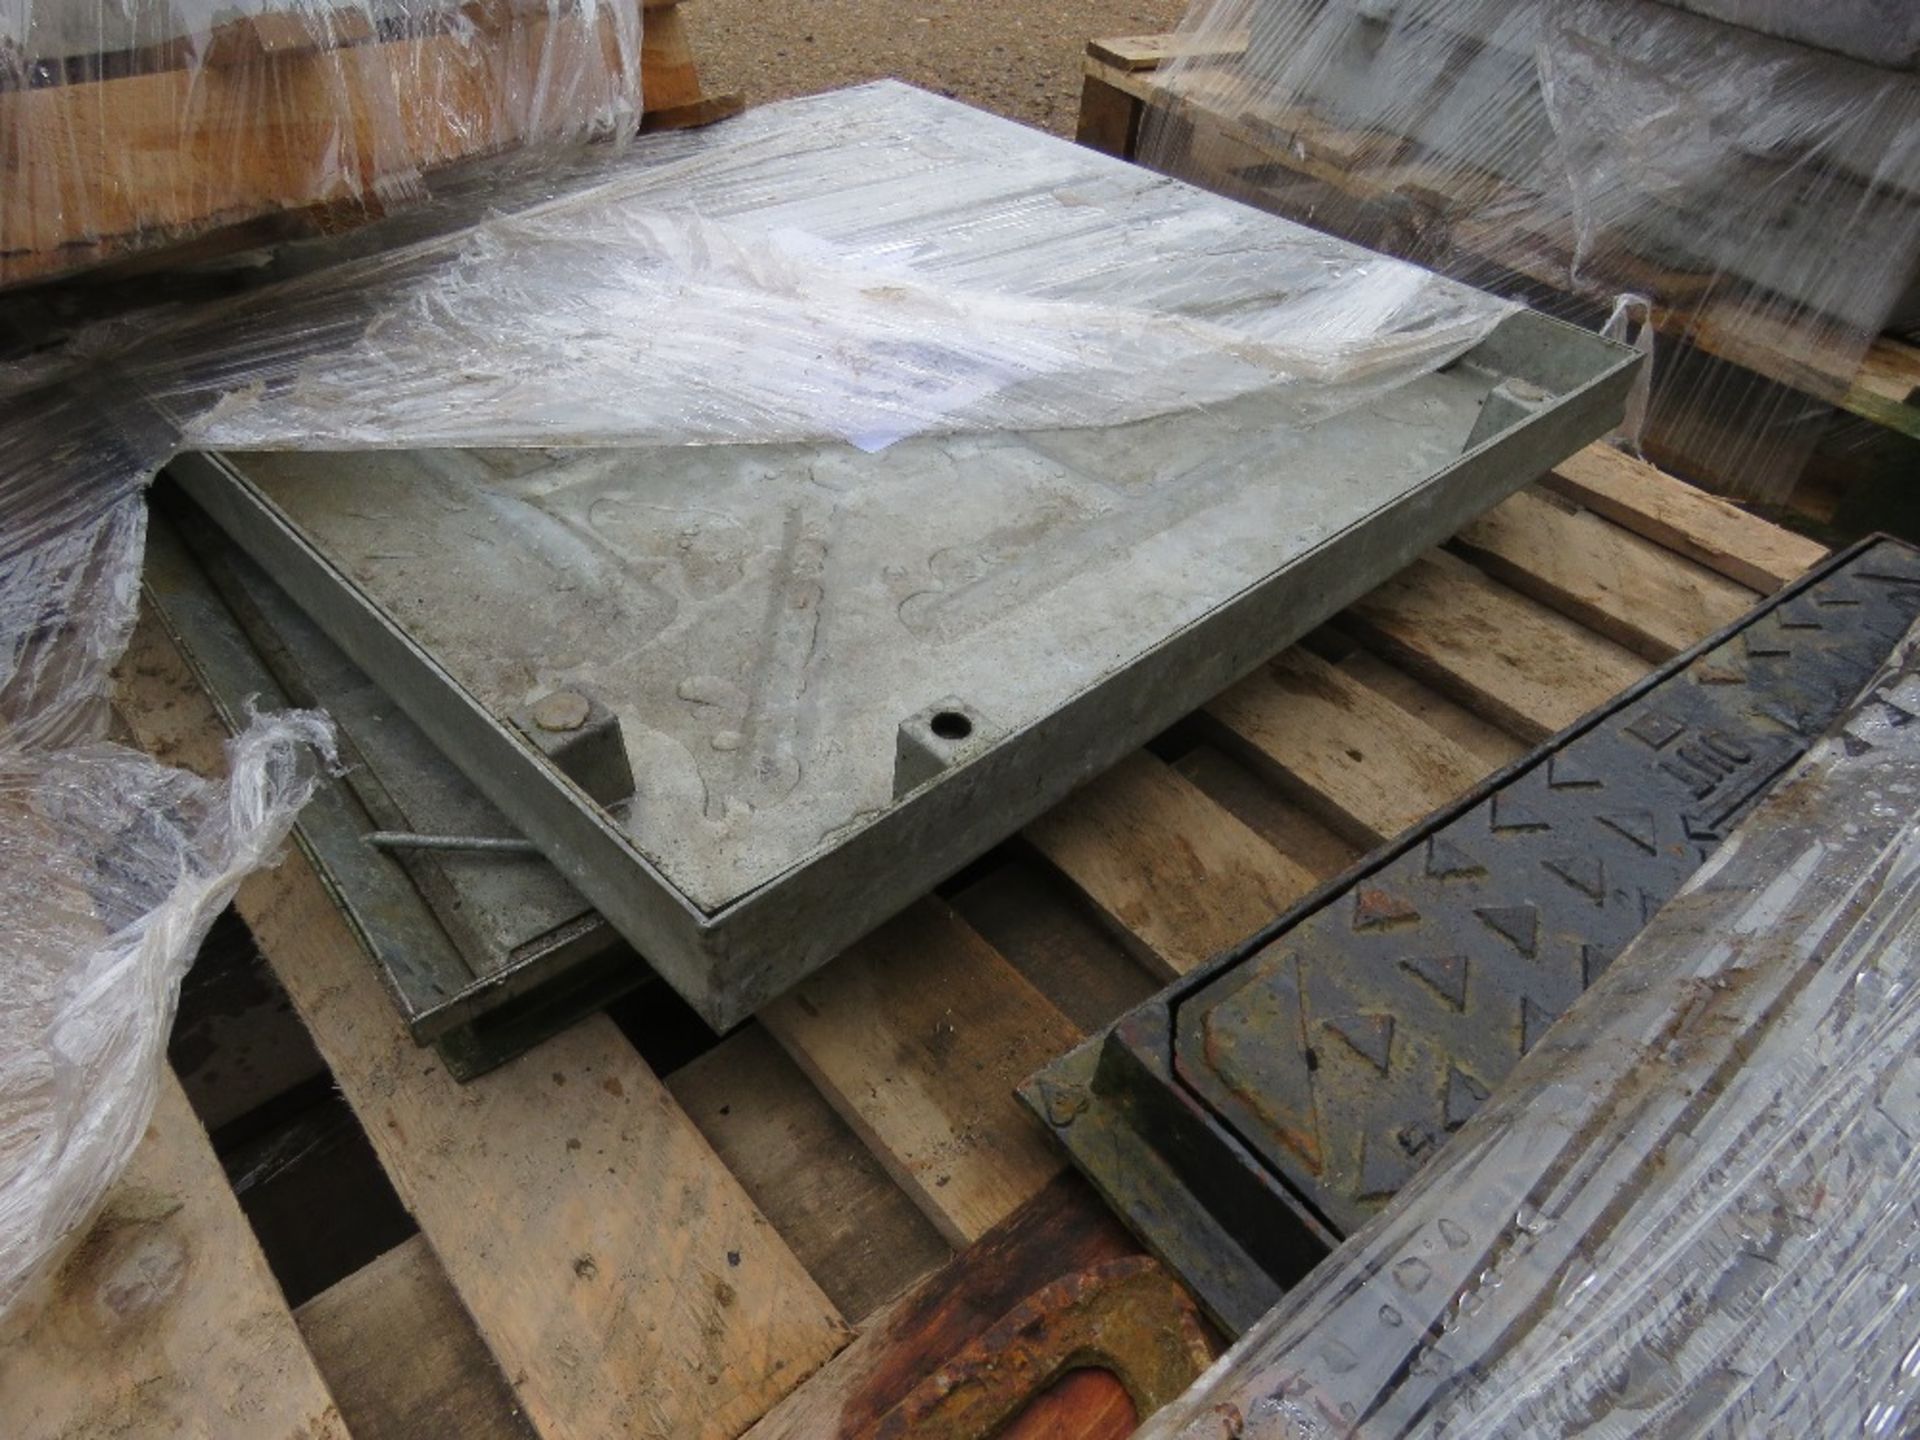 2 X PALLETS OF MANHOLE COVERS WITH SURROUNDS: 2 X GALVANISED 600X600X50 UNITS PLUS 2 X ADVANCED UTIL - Image 5 of 5